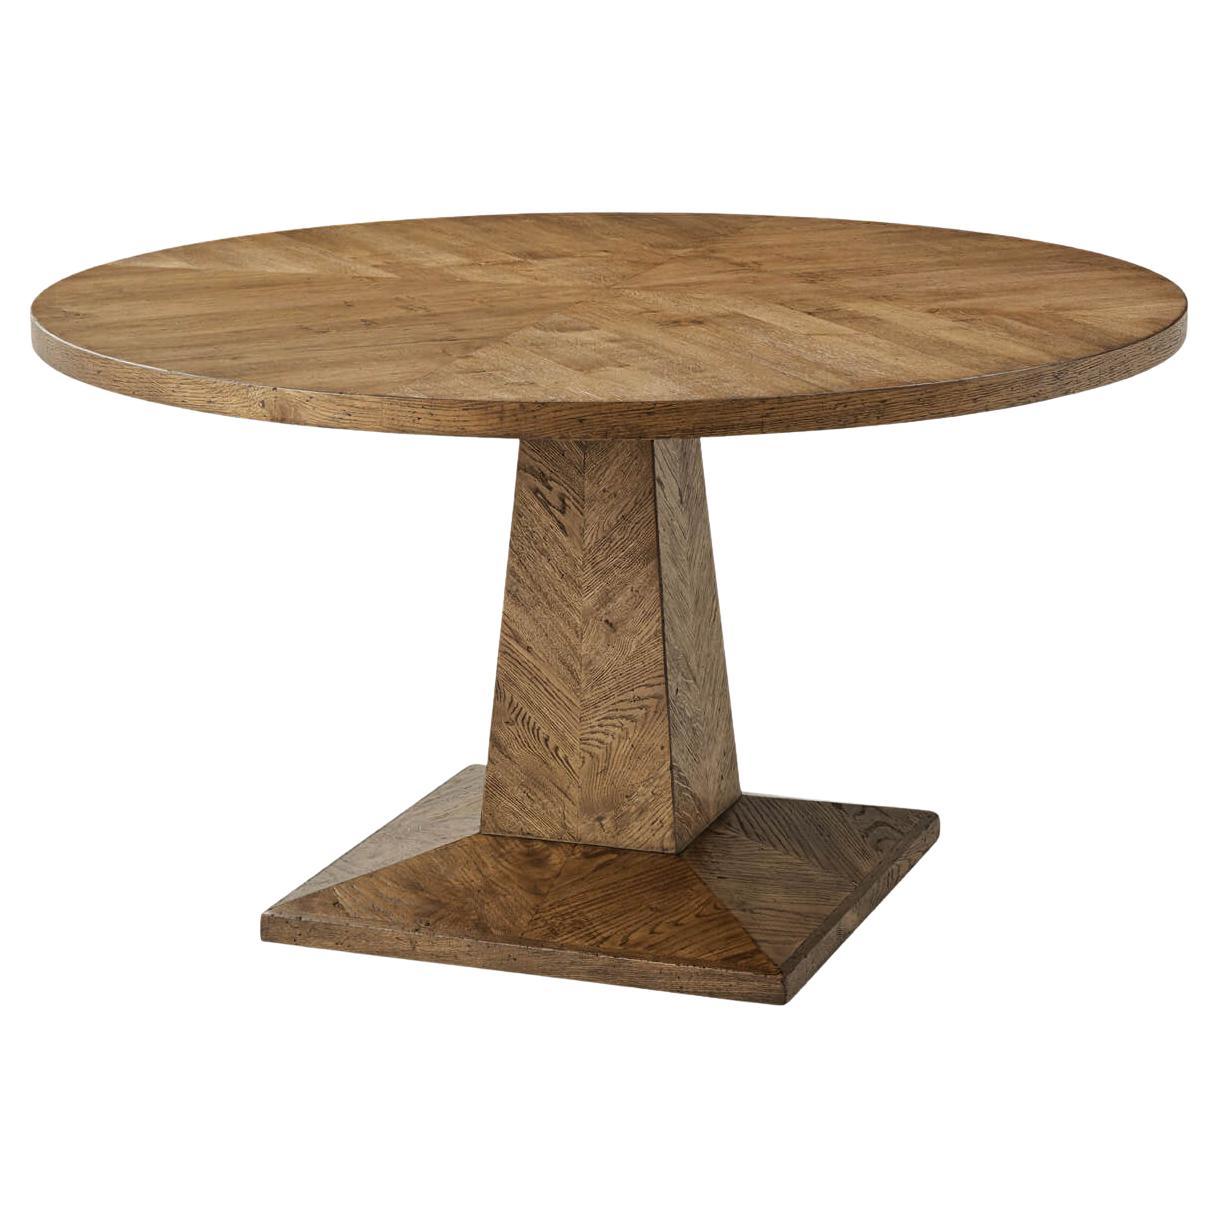 Rustic Oak Parquetry Round Dining Table